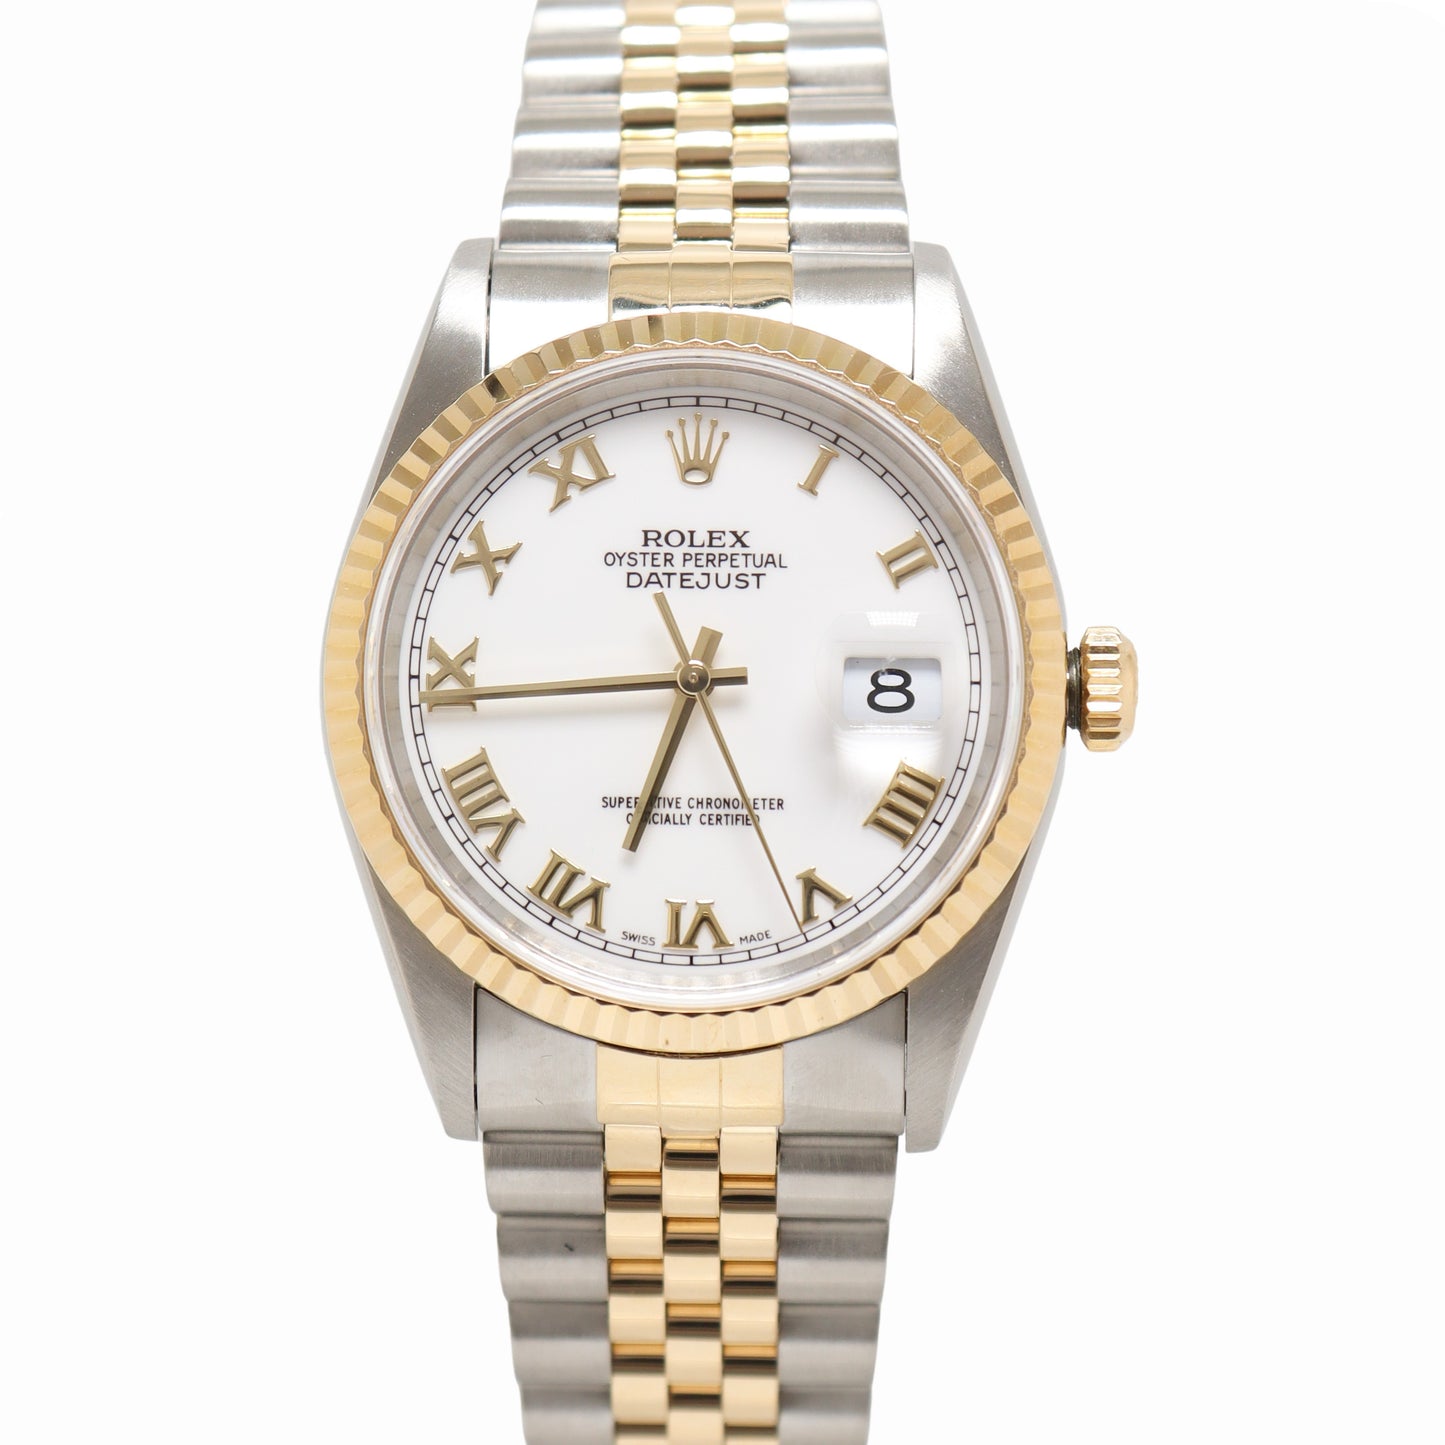 Rolex Datejust Two-Tone Stainless Steel & Yellow Gold 36mm White Roman Dial Watch Reference #: 16233 - Happy Jewelers Fine Jewelry Lifetime Warranty